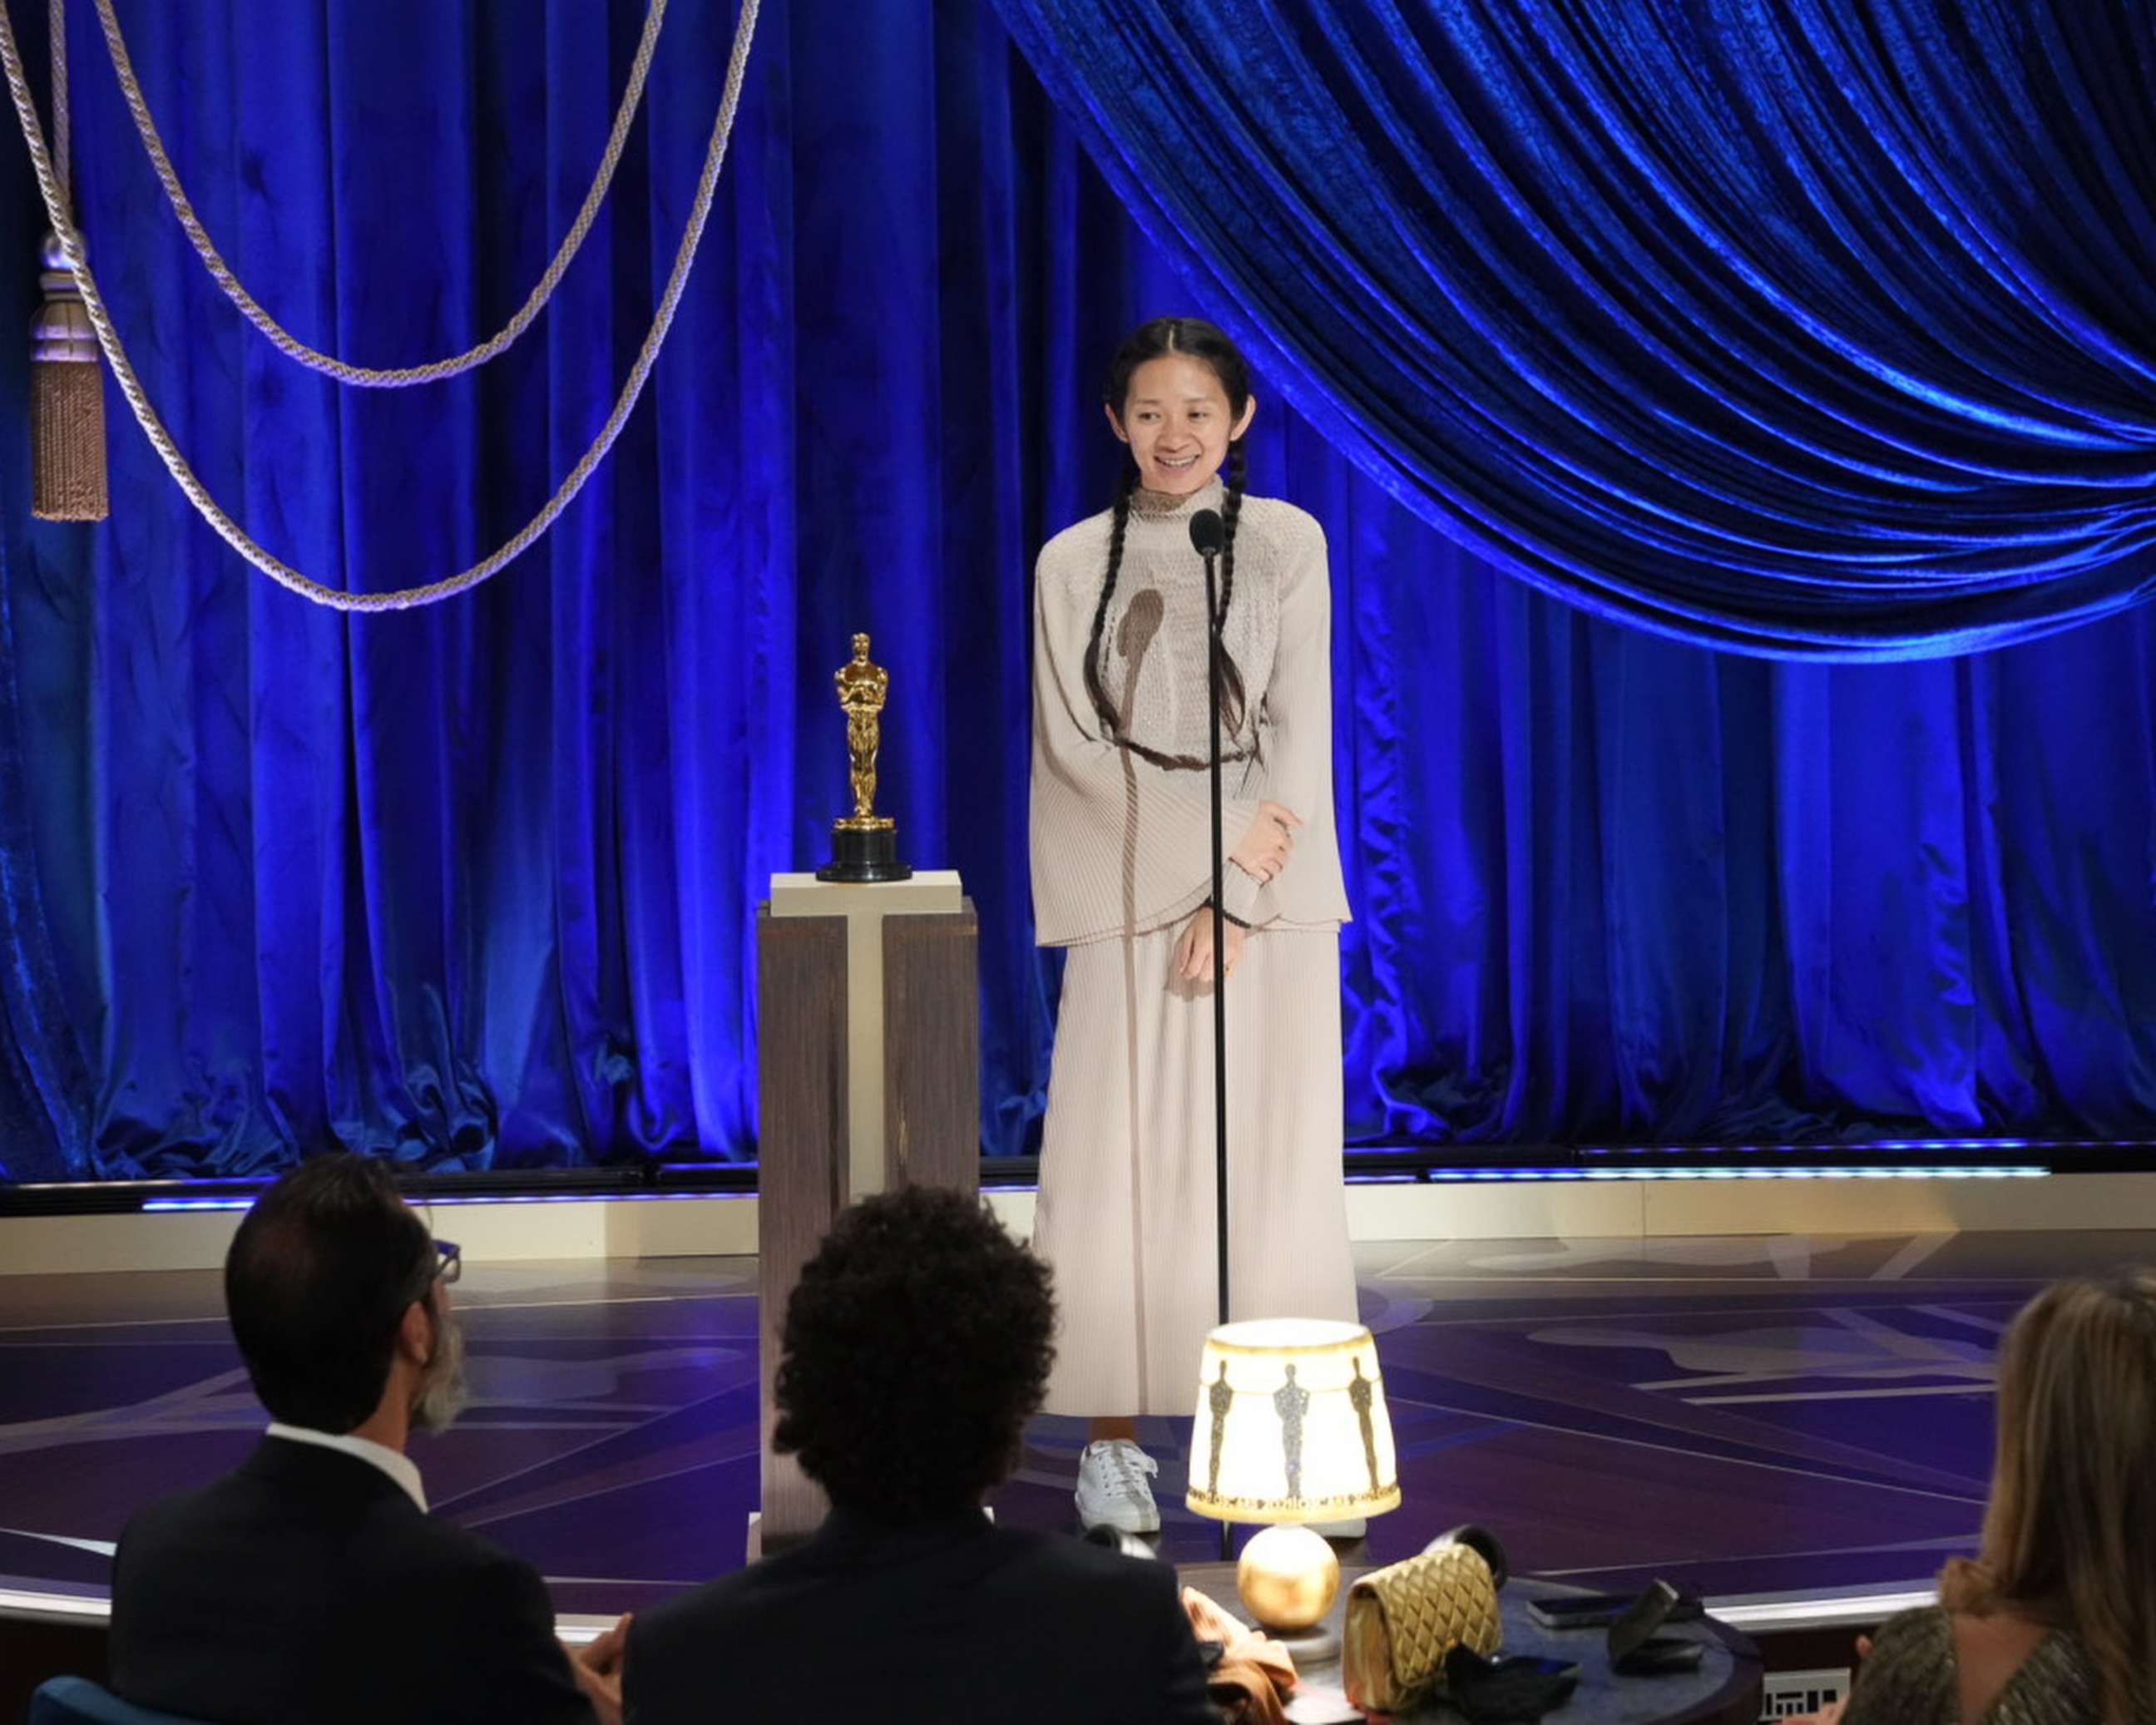 PHOTO: Movie director Chloe Zhao speaks after accepting the Oscar for Best Director for "Nomadland," April 25, 2021, in Los Angeles.